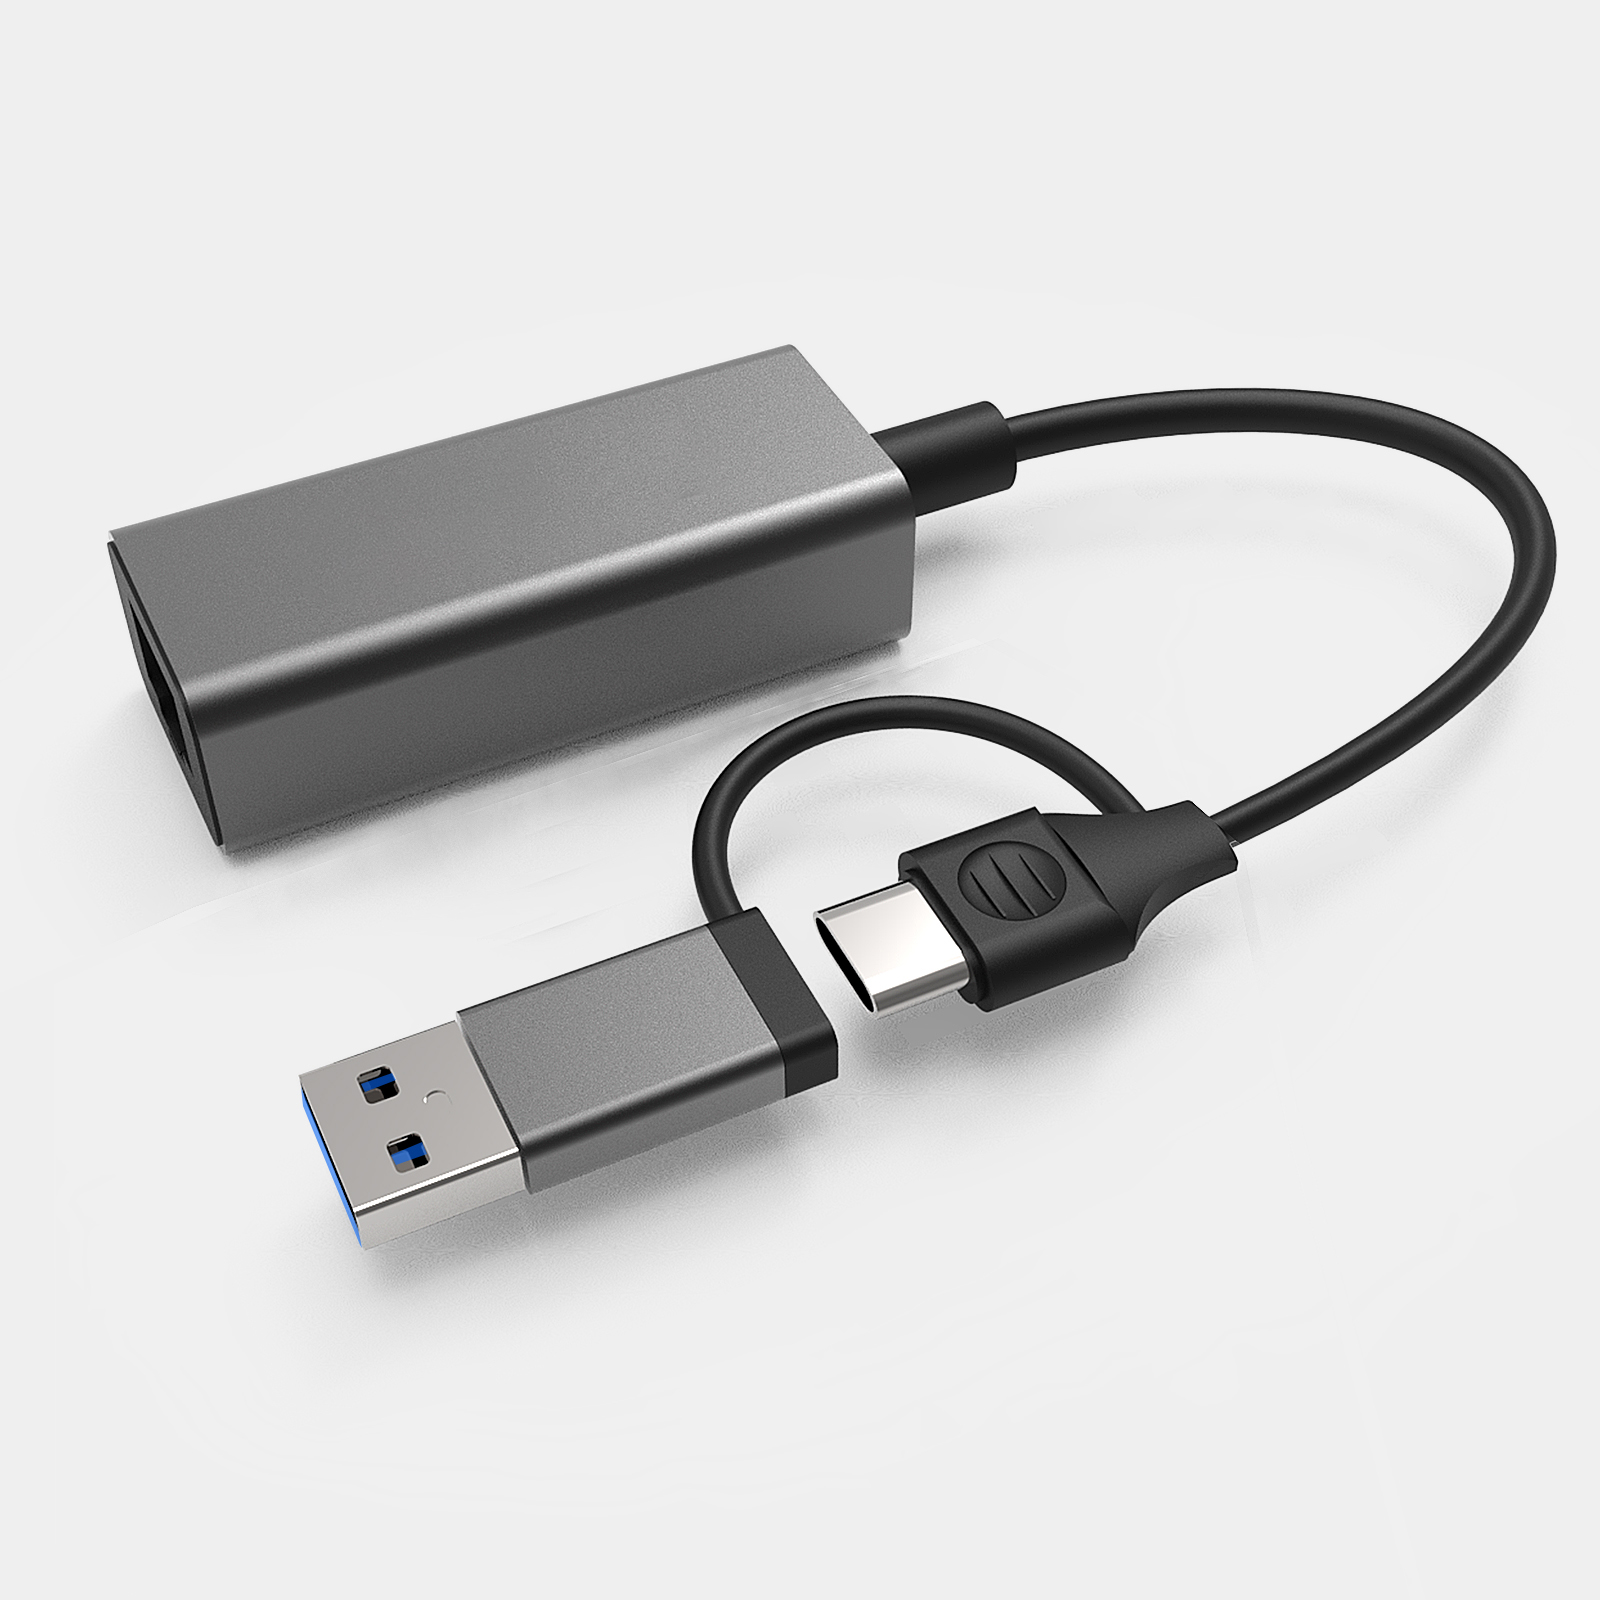 R07 2 in 1 USB 2.0 to Ethernet Lan Adapter USB C